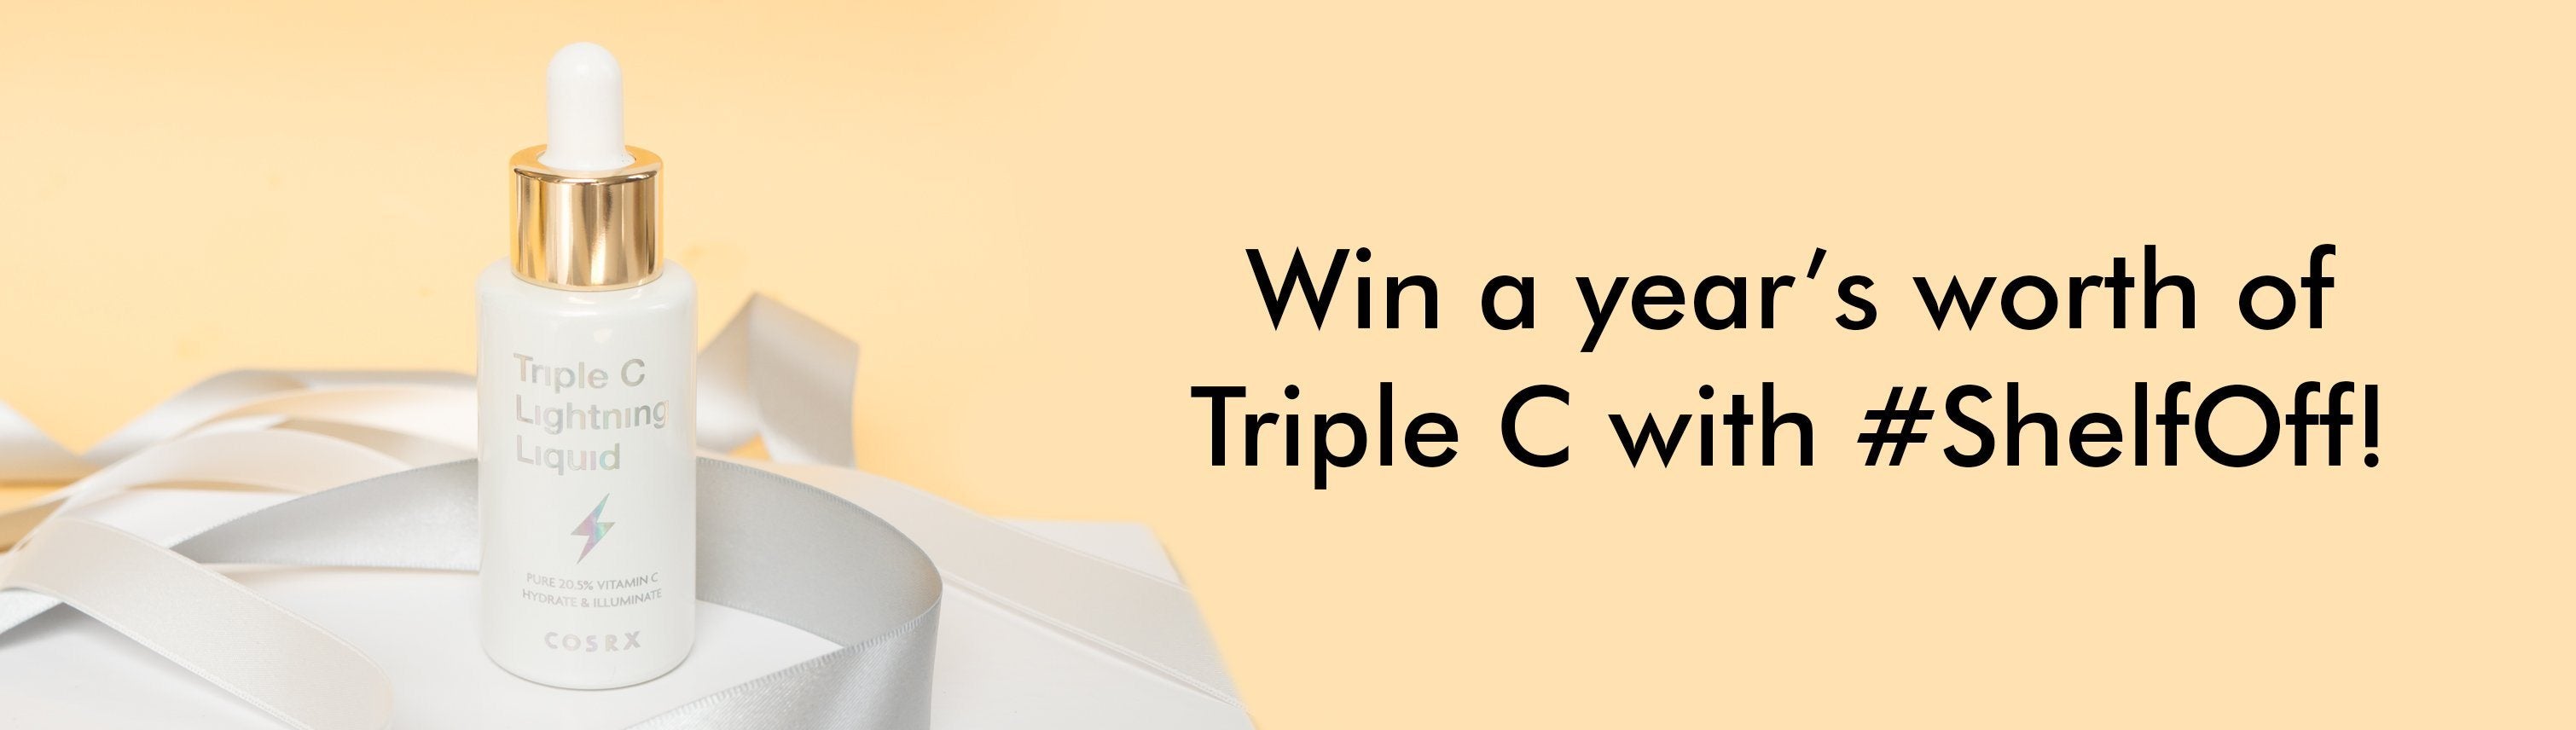 Win a year's worth of Triple C